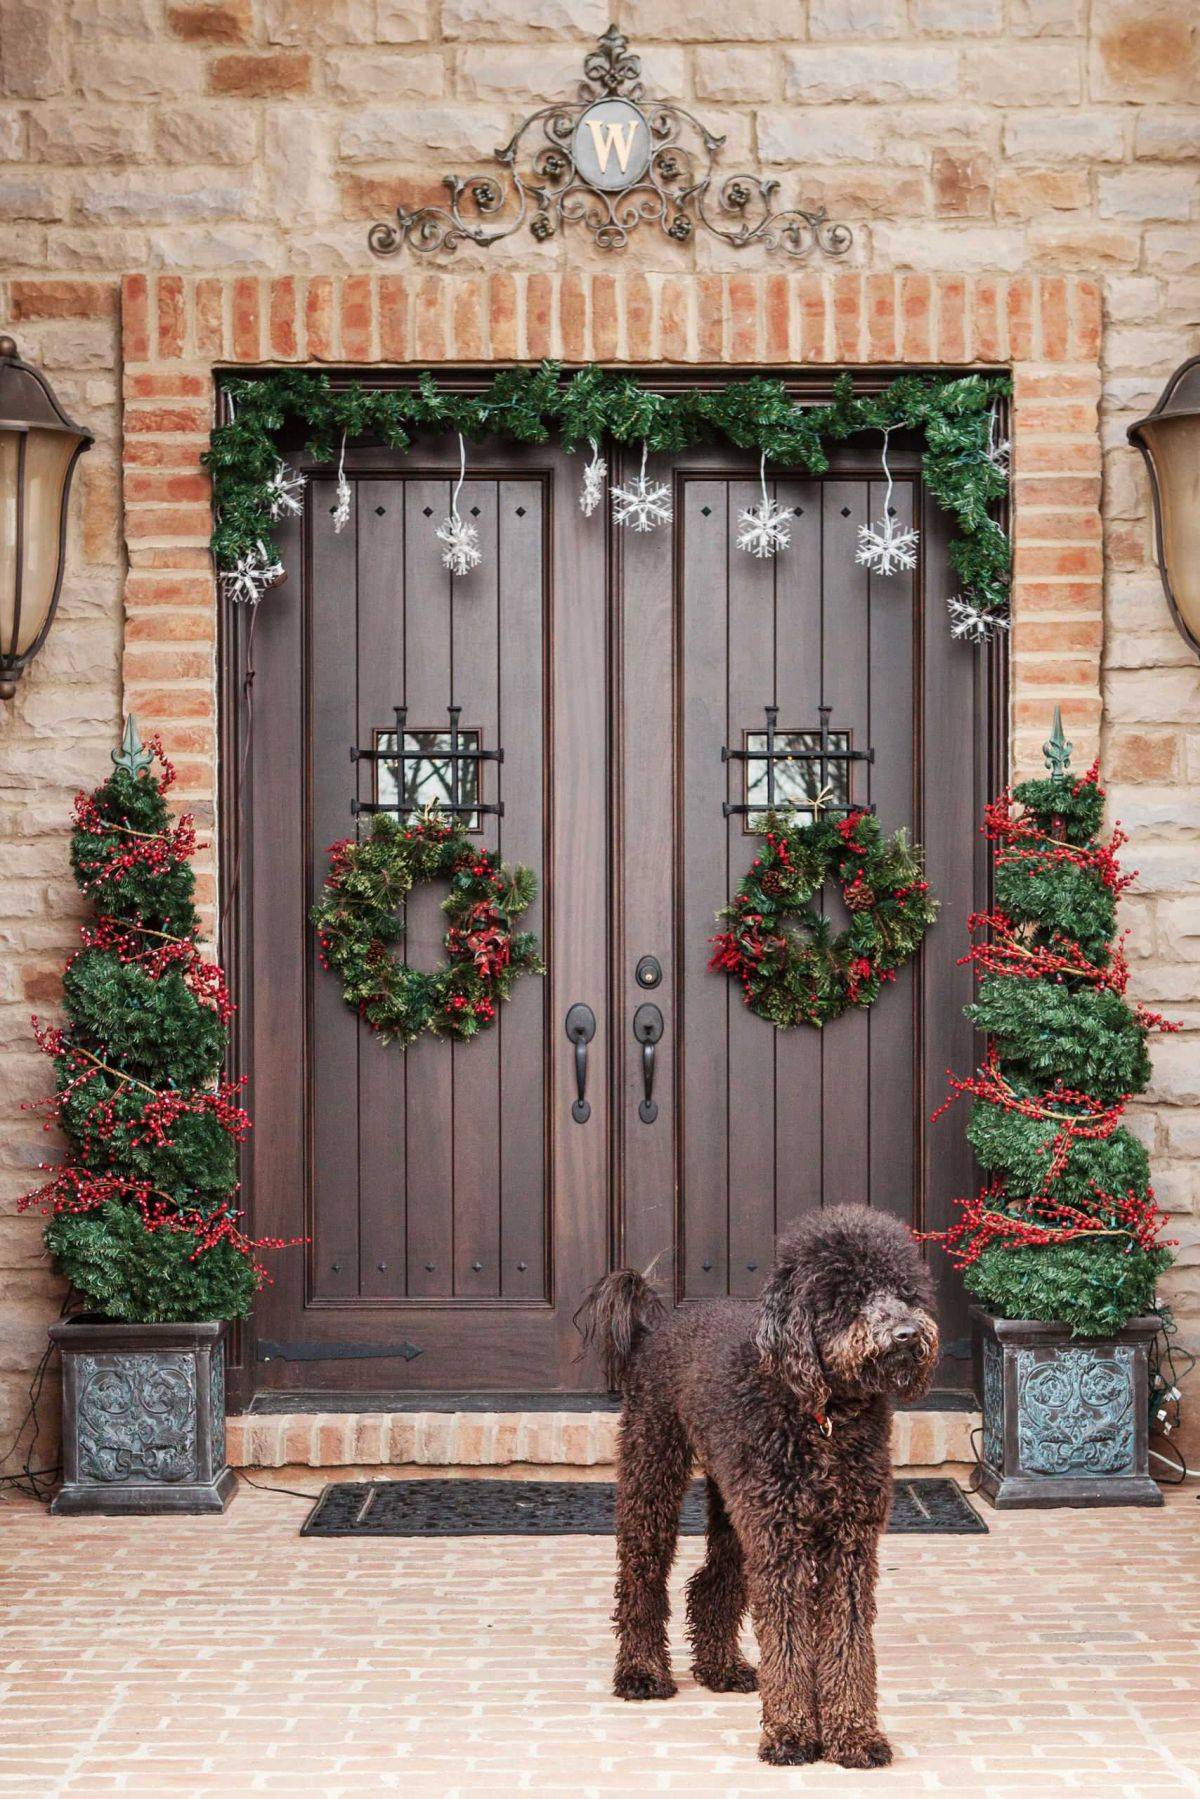 Mistle-toe-banner-green-Christmas-wreath-and-decked-out-plants-for-the-Holiday-entryway-46248